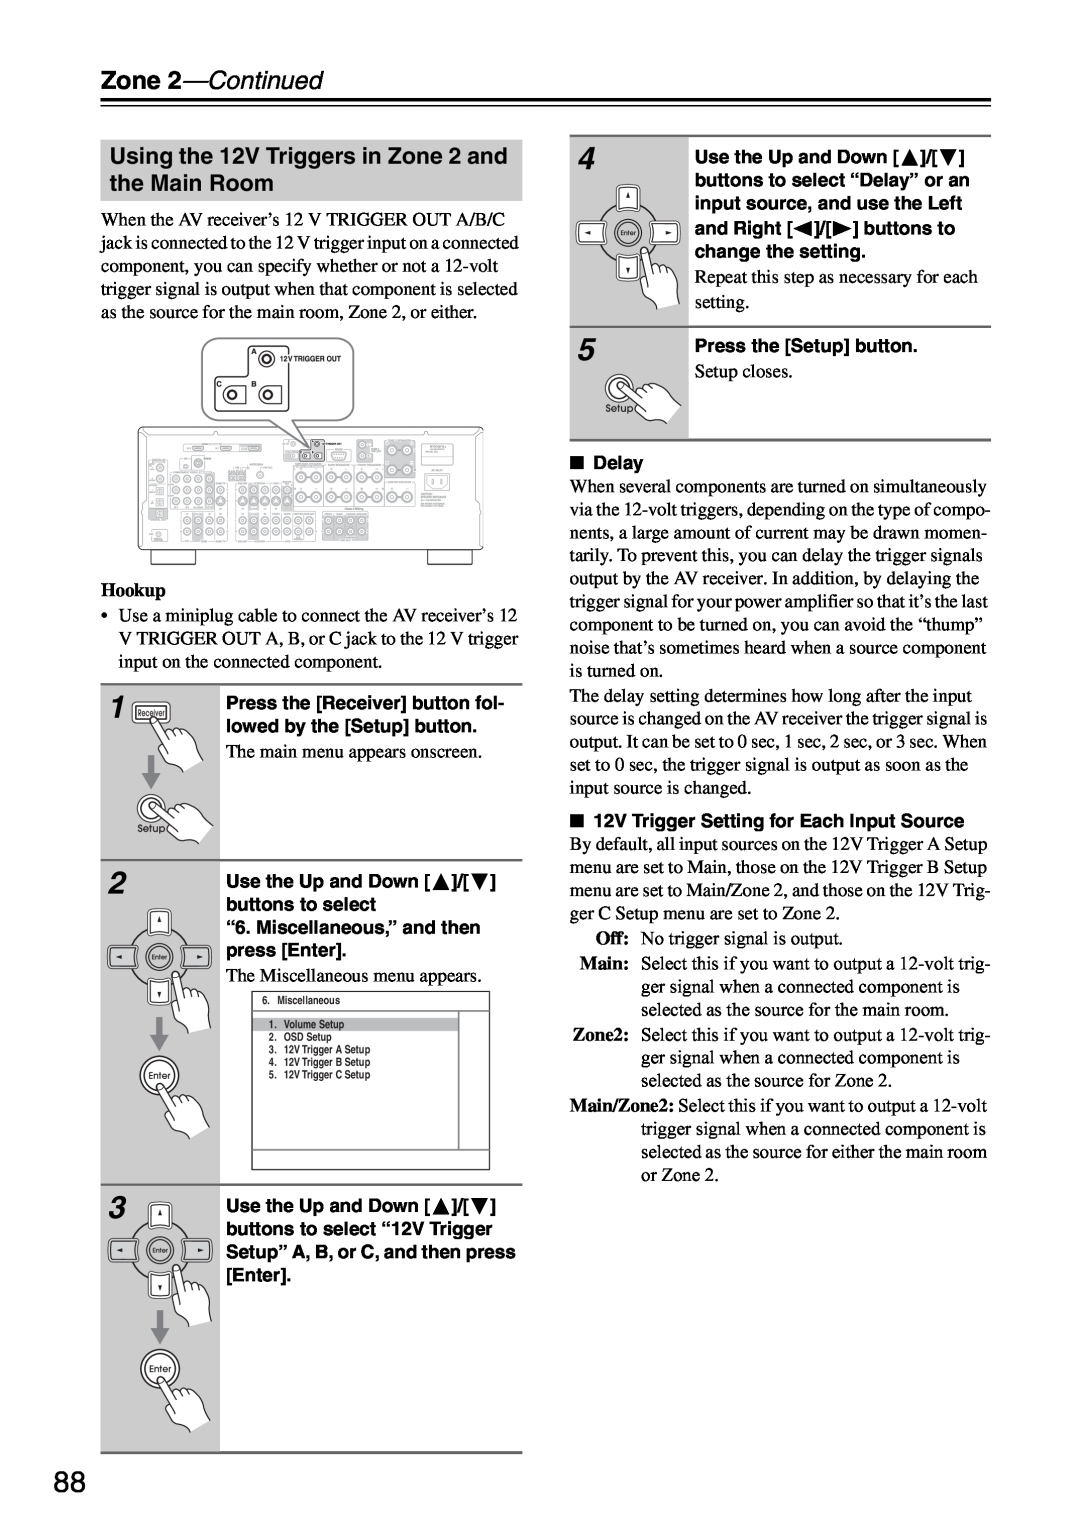 Integra DTR-5.8 instruction manual The main menu appears onscreen, Zone 2—Continued, Hookup 